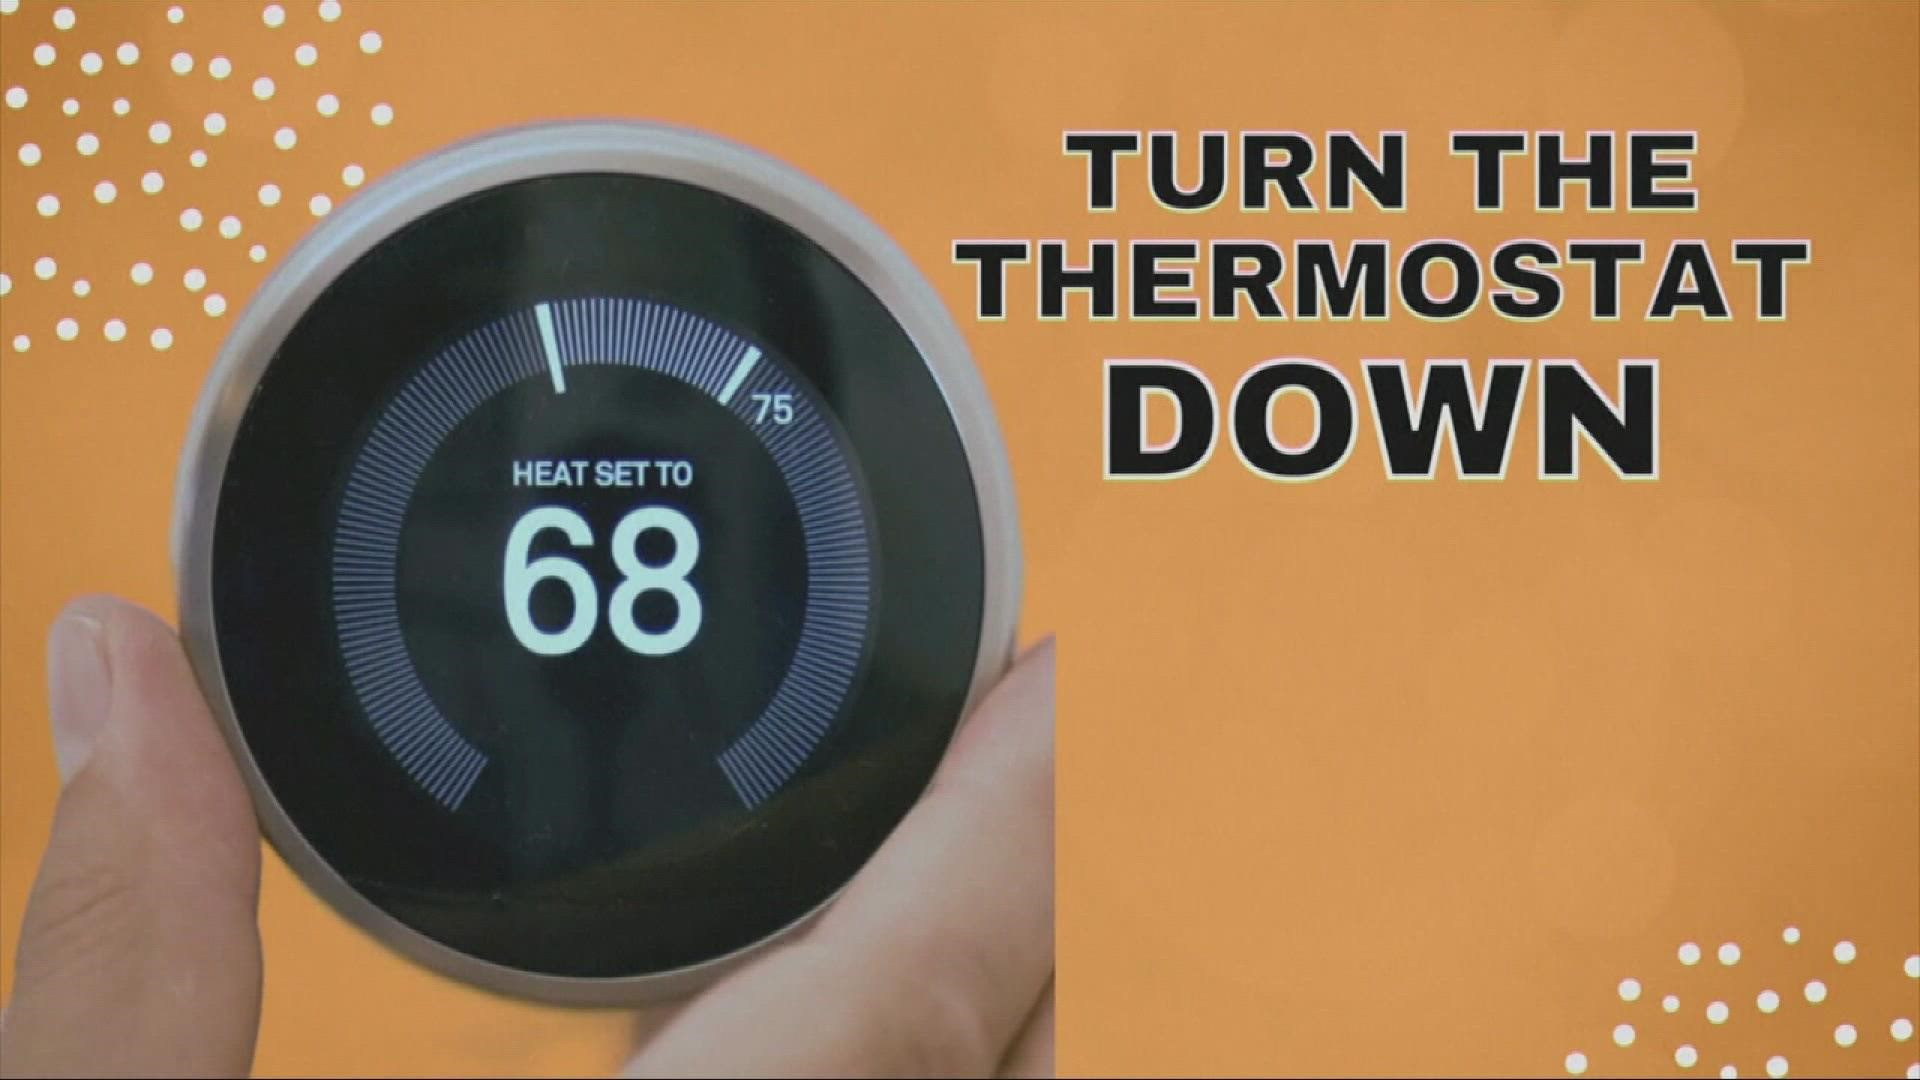 Here are some money-saving tips to heat your home as the temperatures cool down.